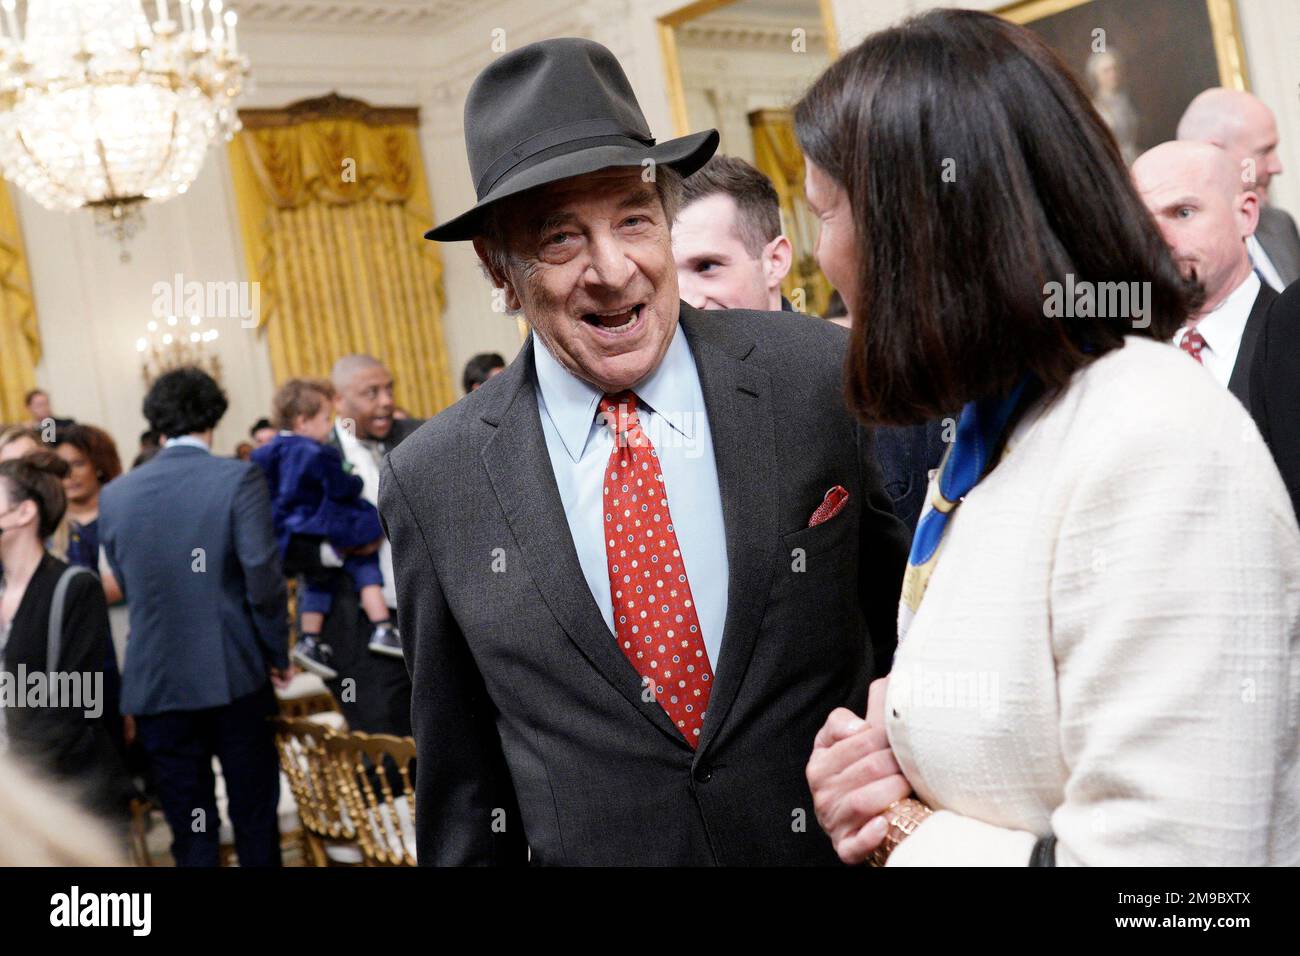 Paul Pelosi, husband of former House Speaker Nancy Pelosi, departs after U.S. President Joe Biden welcomed the Golden State Warriors to the White House to celebrate their 2022 NBA championship at the White House in Washington on January 17, 2023. Photo by Yuri Gripas/ABACAPRESS.COM Stock Photo